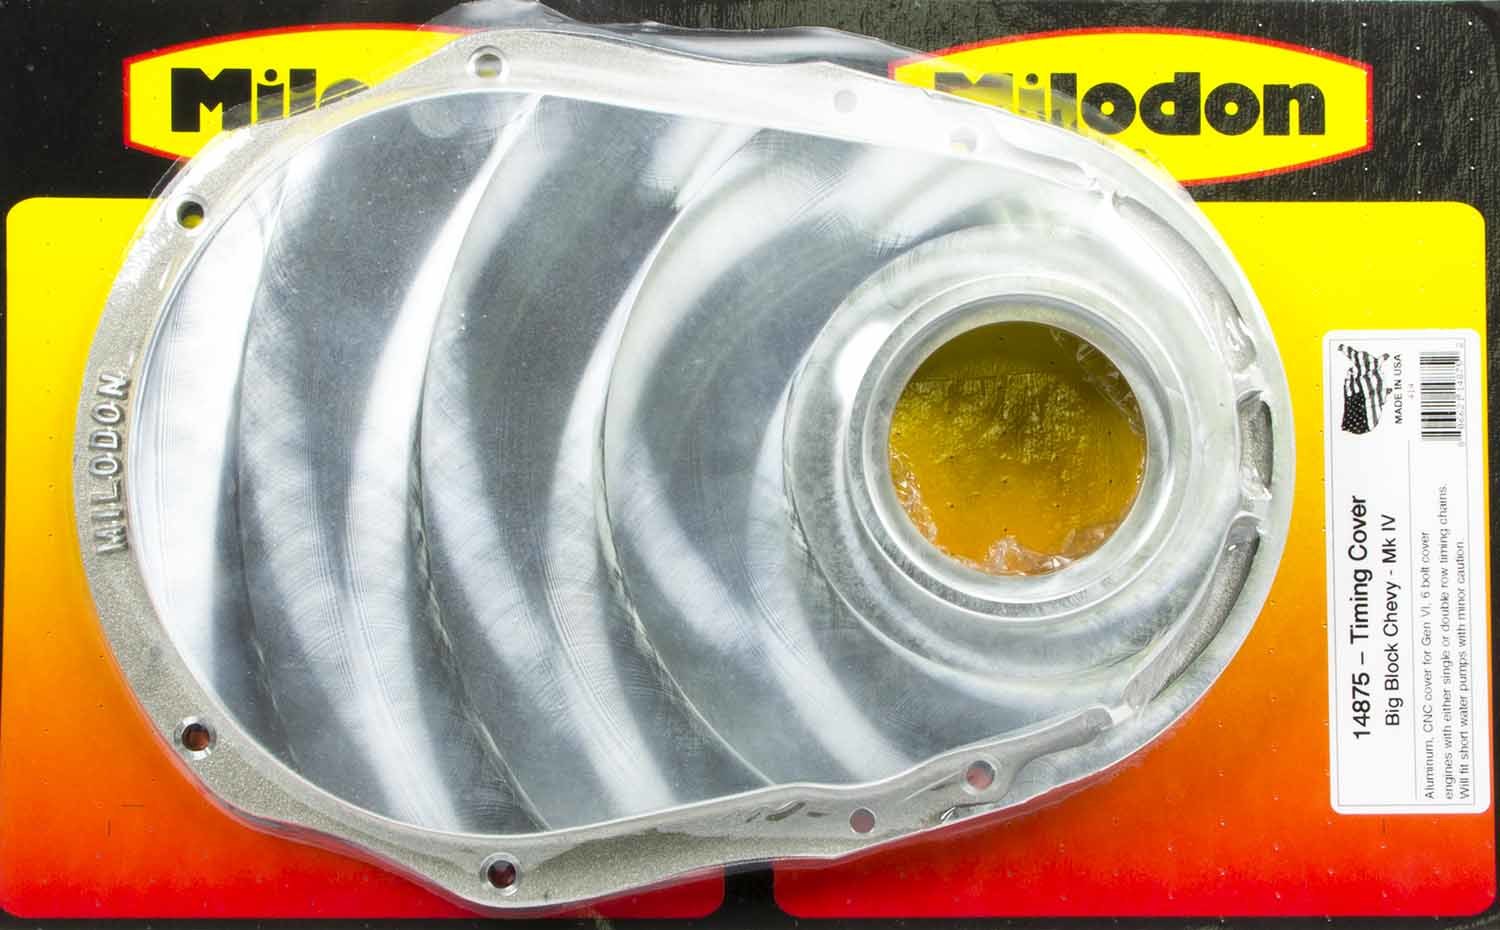 Milidon 14875 Timing Cover, 1-Piece, Hardware / Water Pump Gaskets Included, Aluminum, CNC Machined, Big Block Chevy, Each